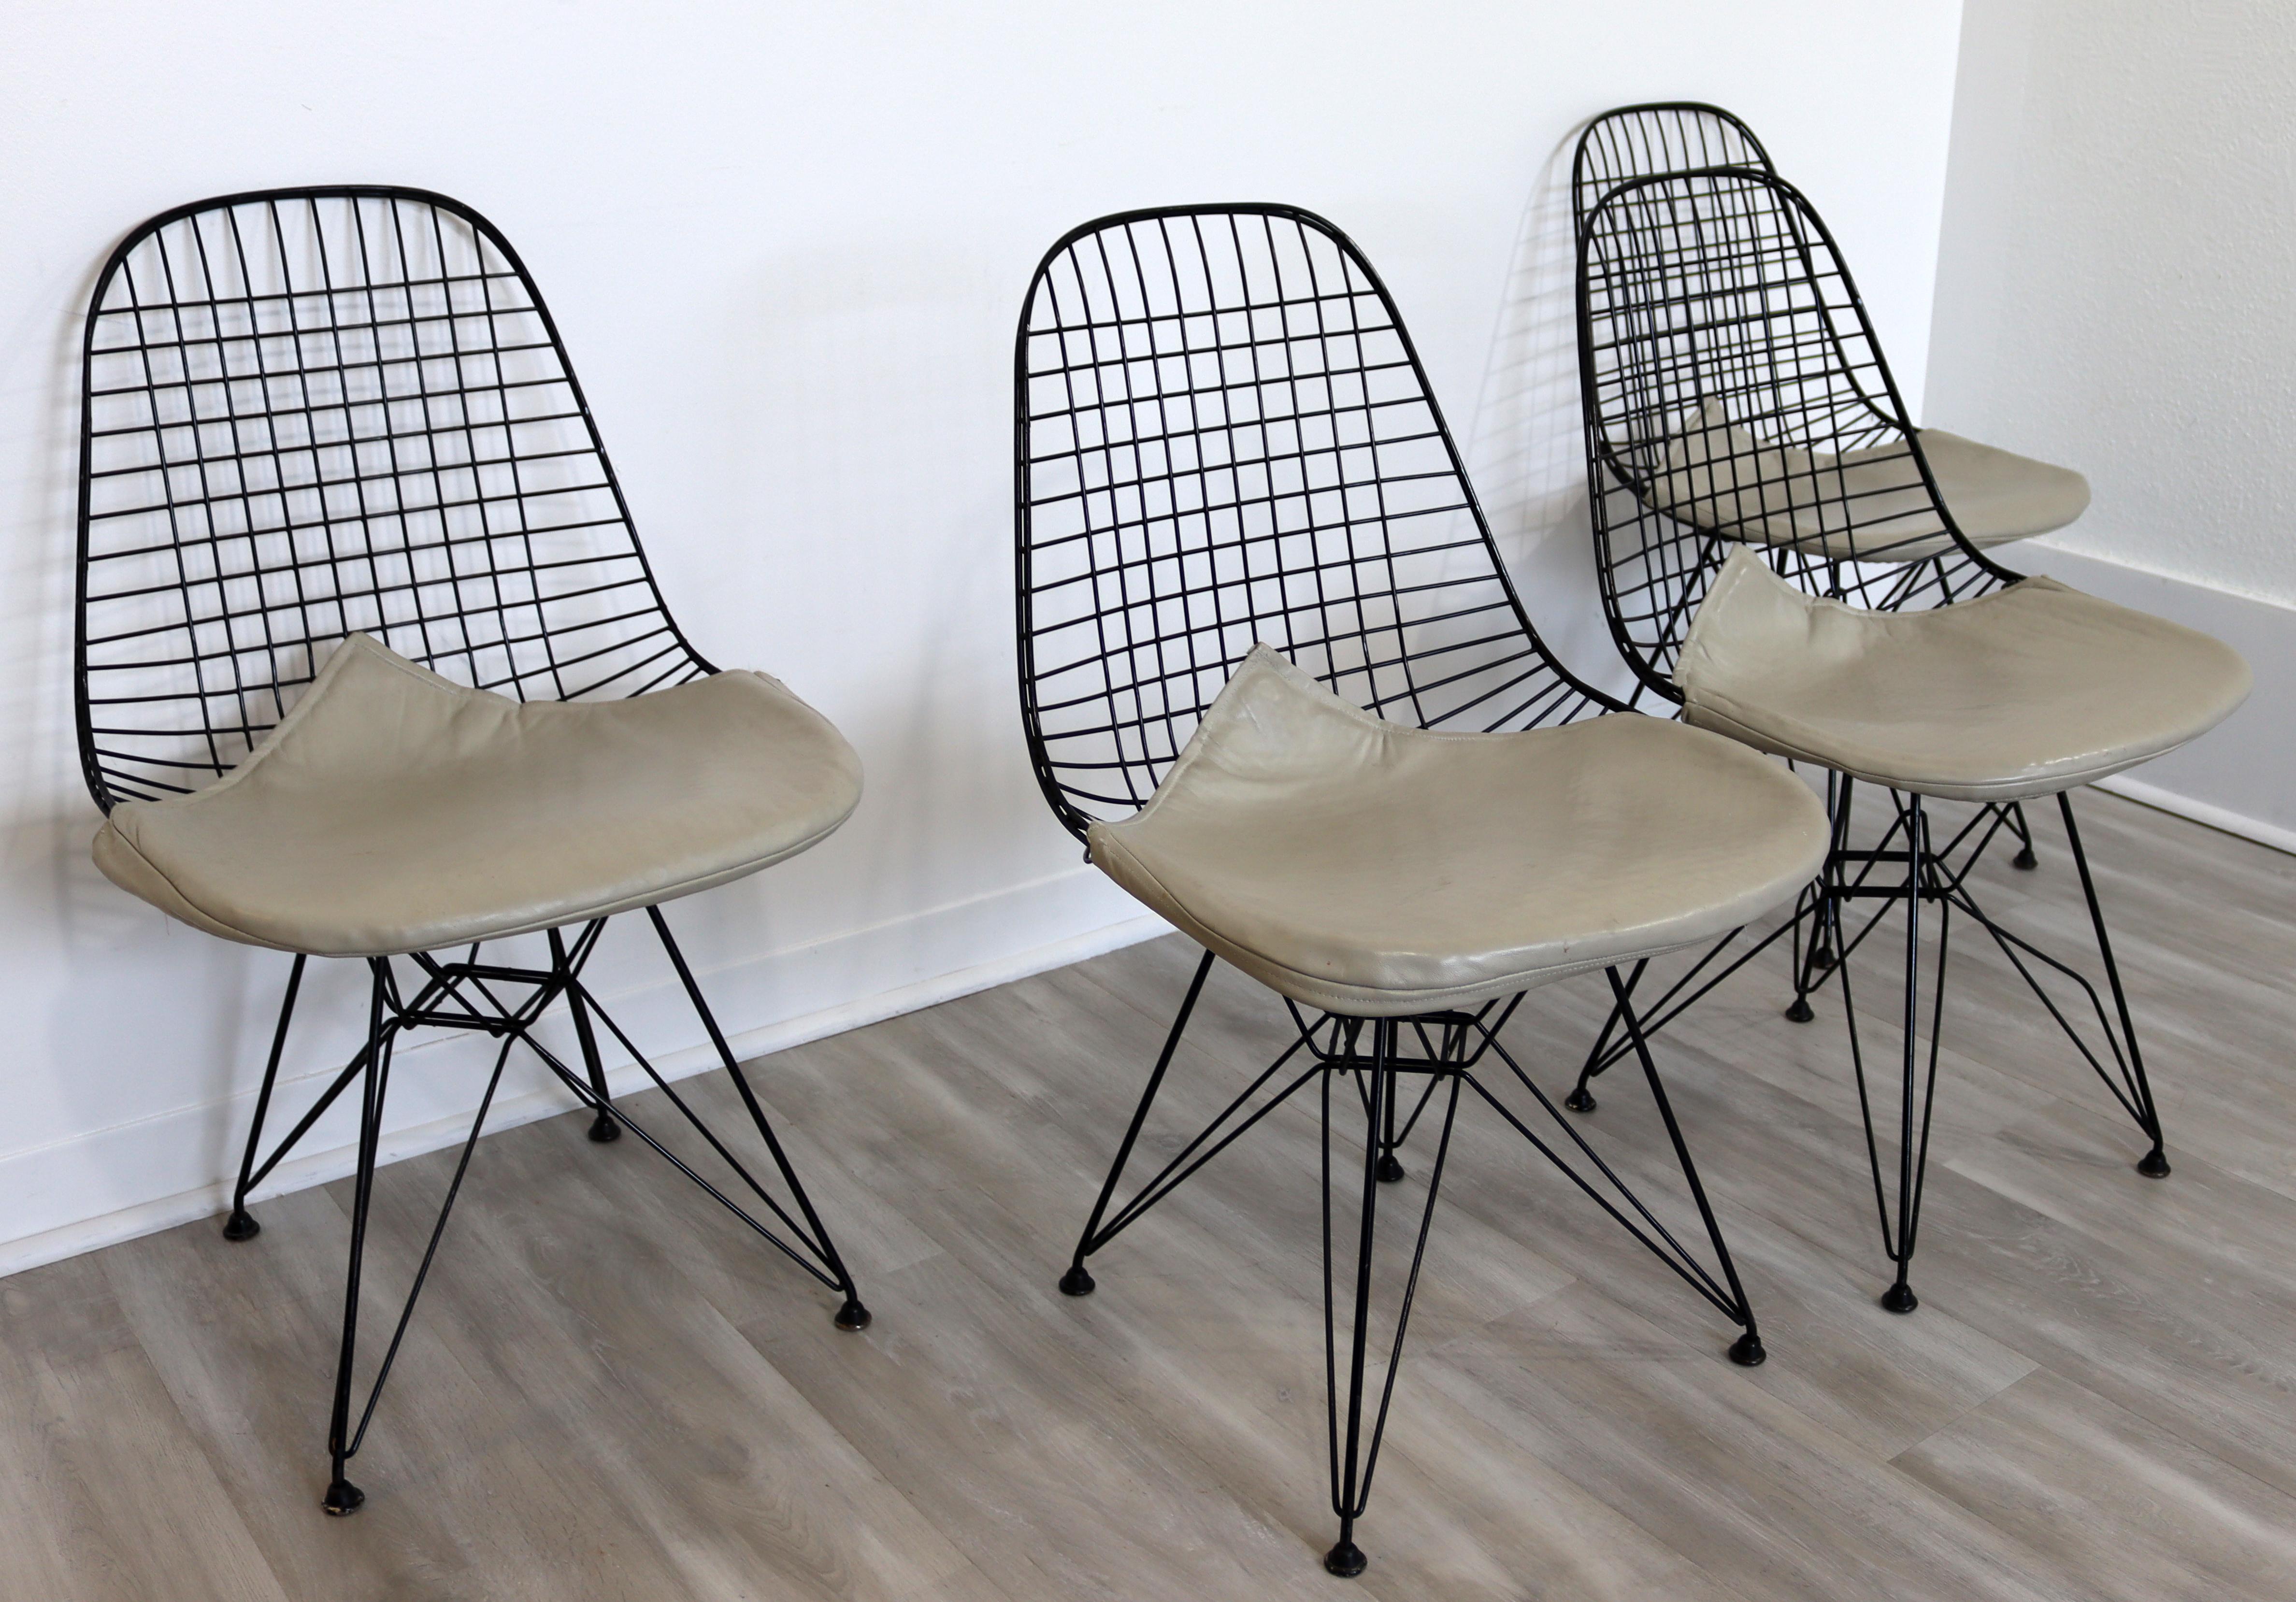 For your consideration is a brilliant set of four, Eiffel Tower base side chairs, with beige Bikini covers, by Charles & Ray Eames, circa the 1960s. In very good vintage condition. The dimensions are 19